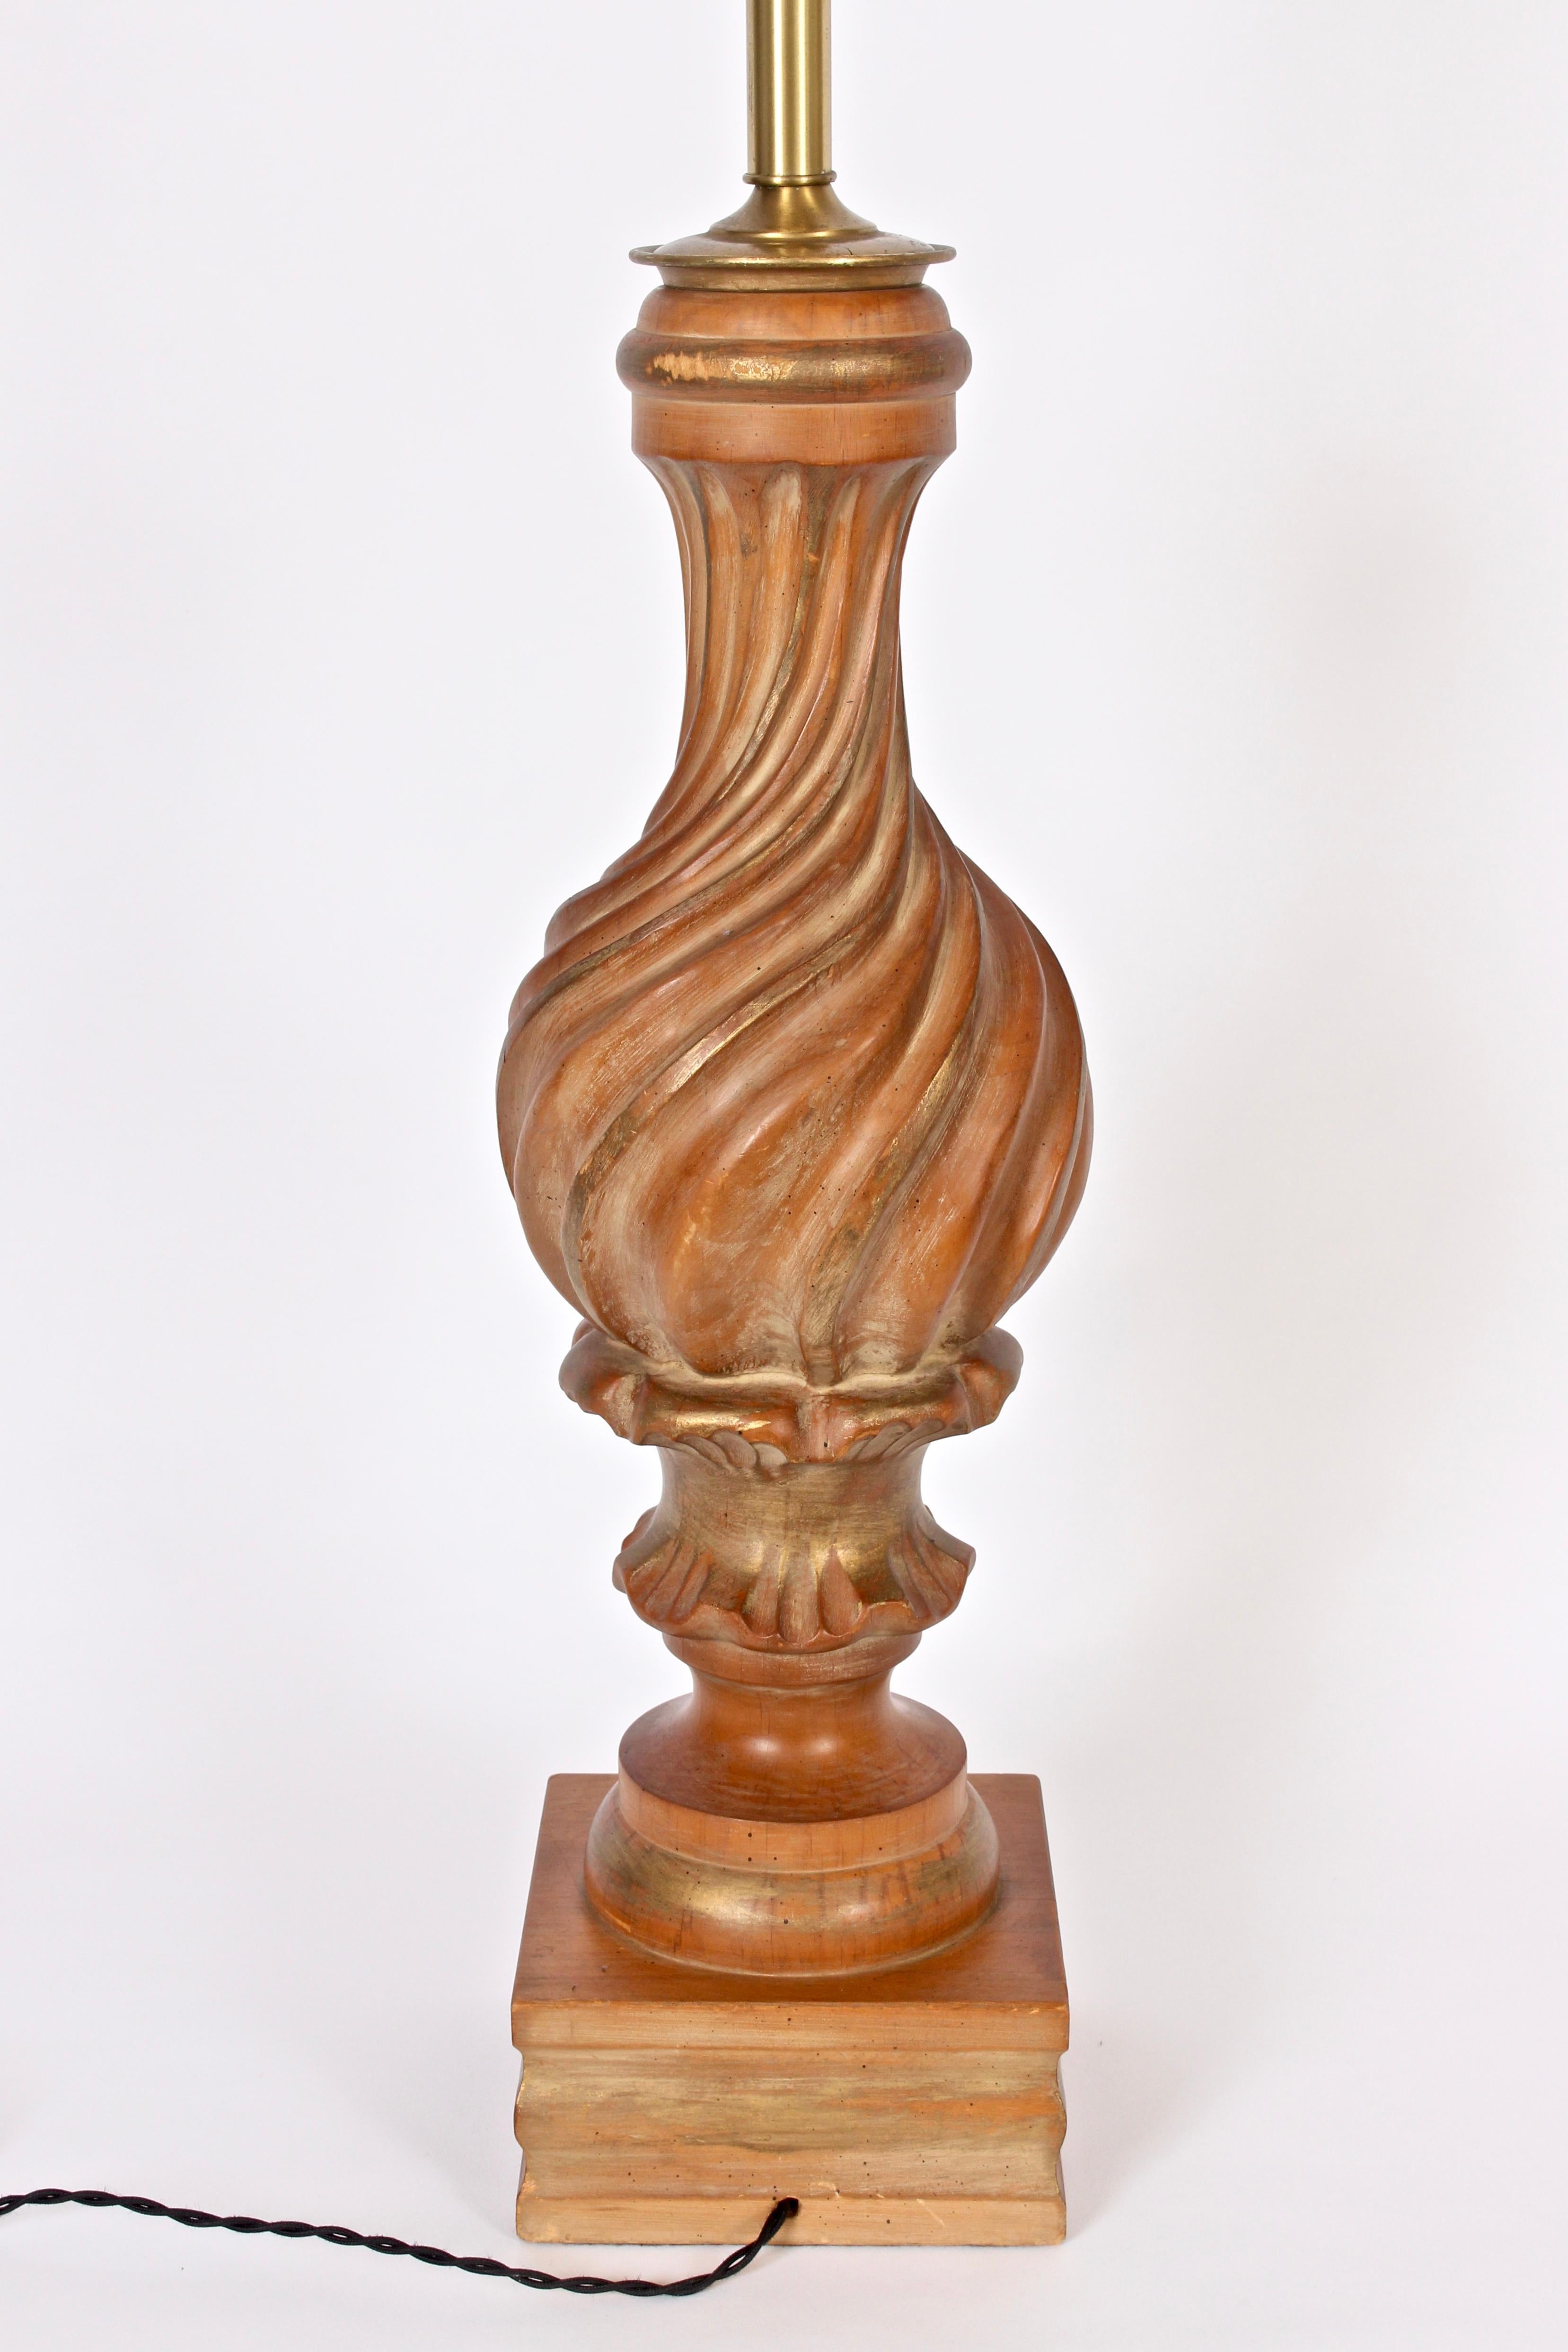 Monumental Marbro Lamp Co. Hand Carved Giltwood Table Lamp In Good Condition For Sale In Bainbridge, NY